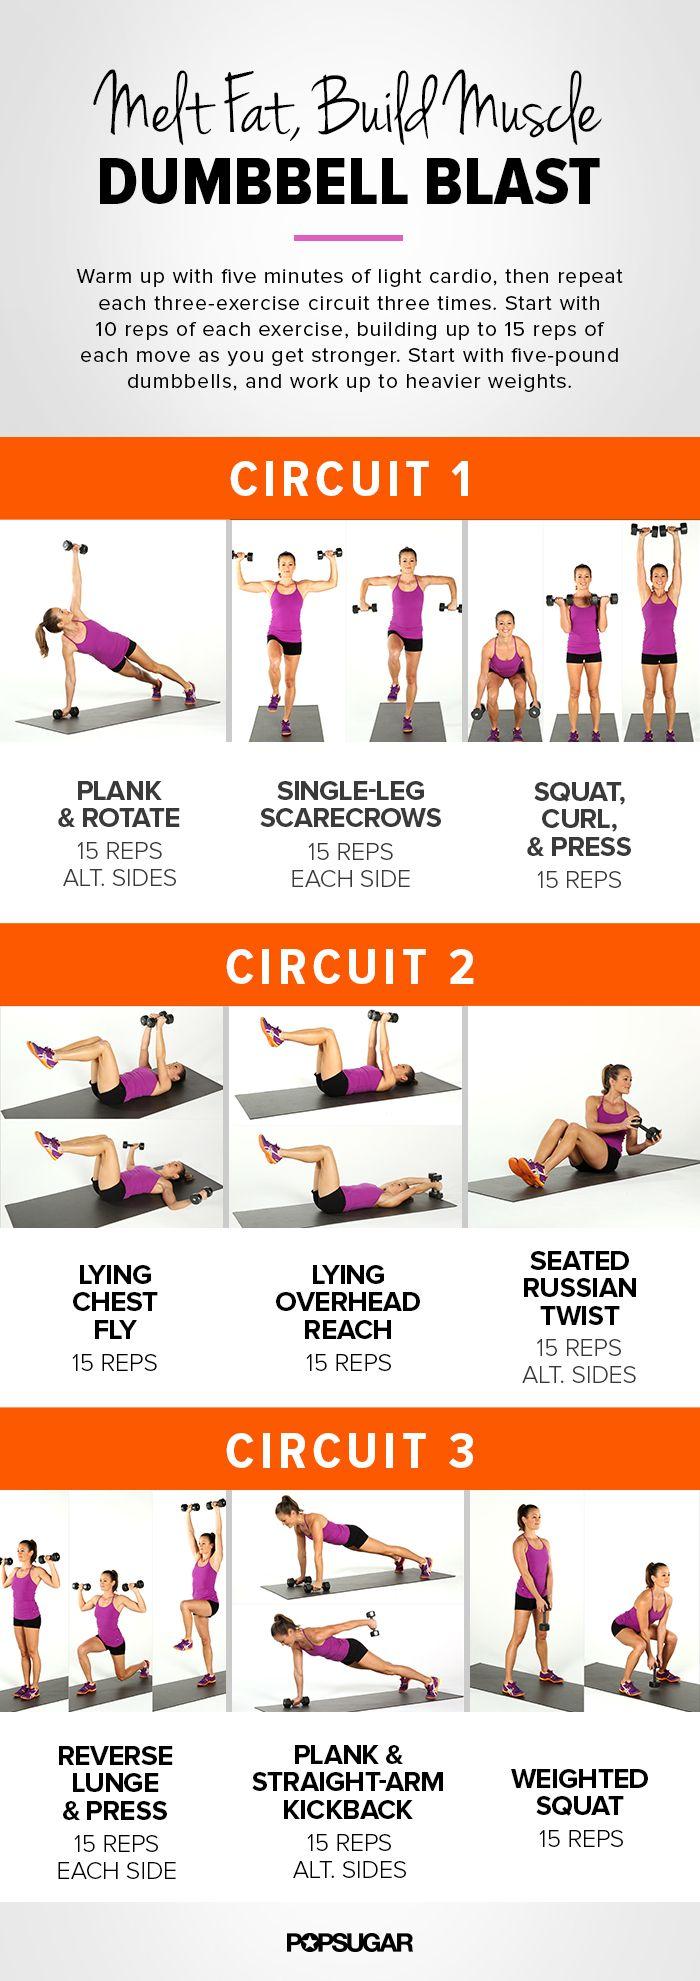 Wedding - Melt Fat And Build Muscle: Printable Workout With Weights